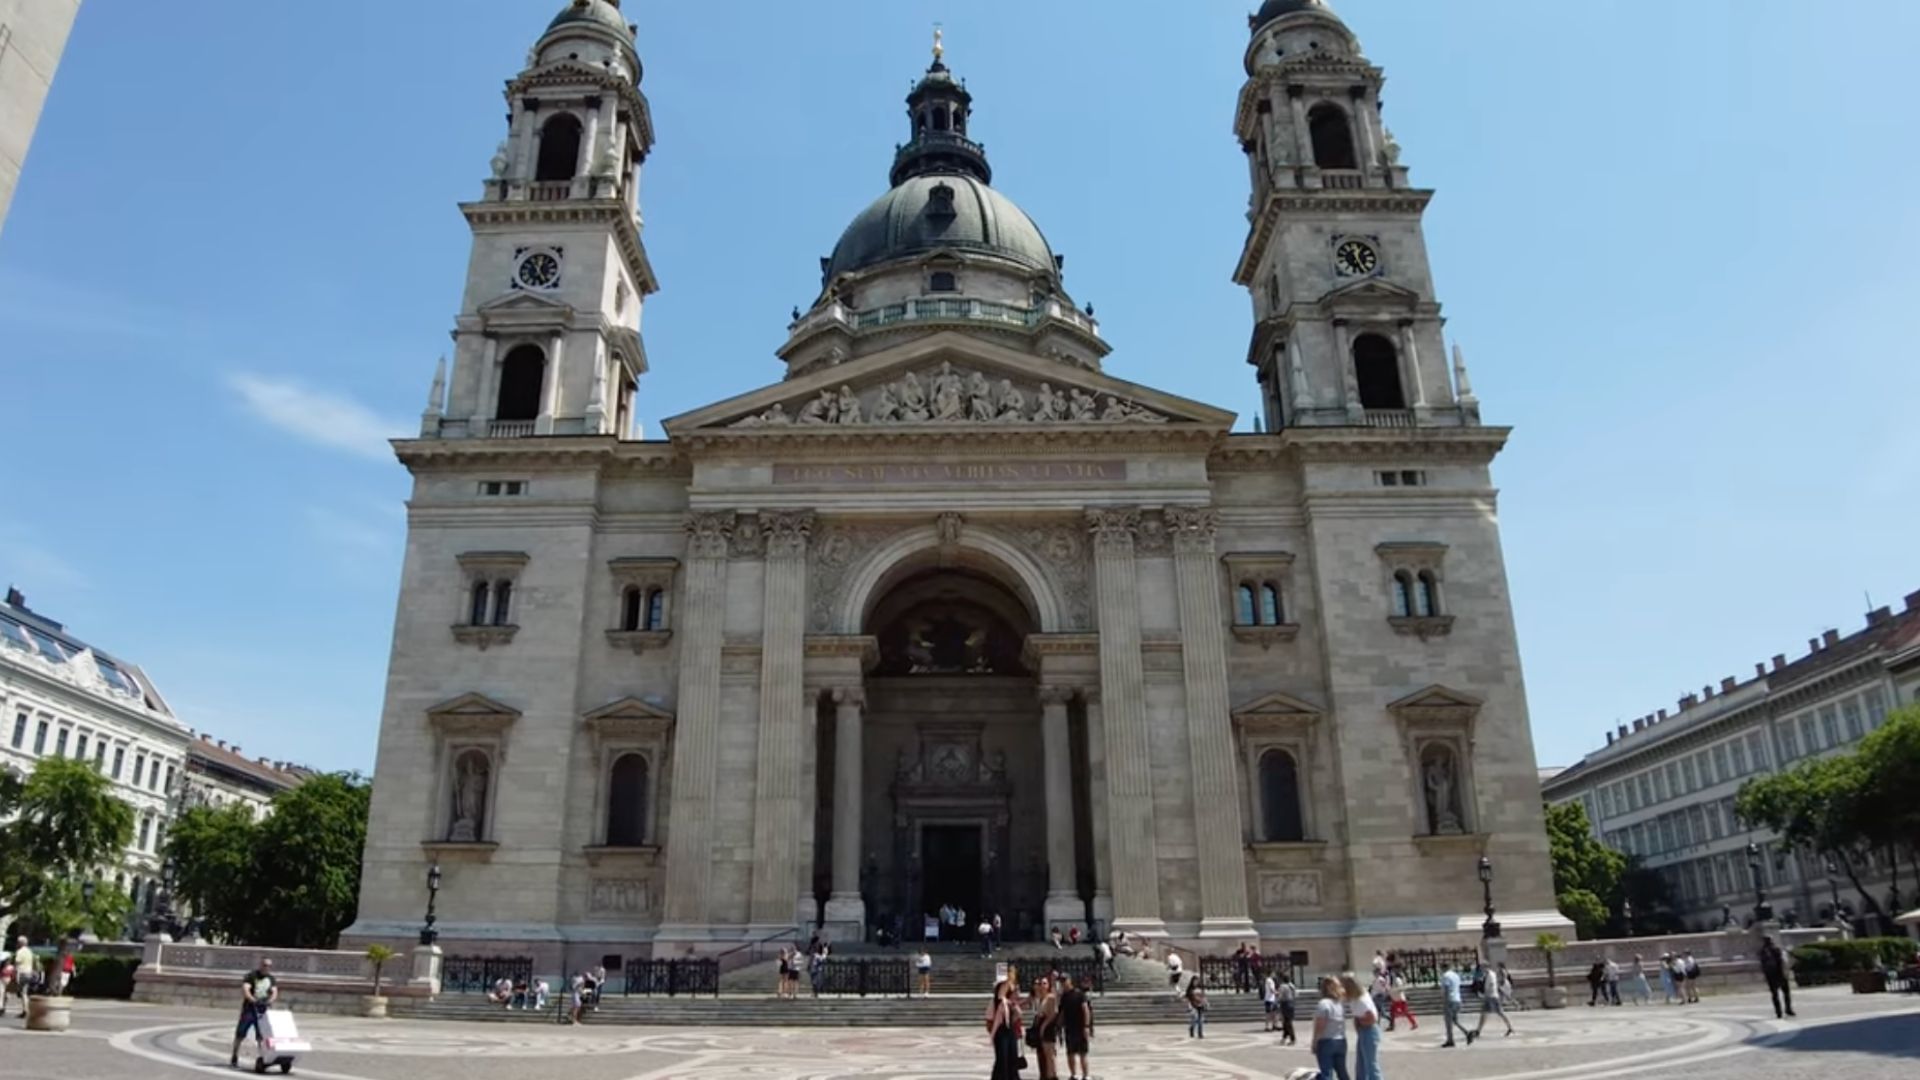 St. Stephen's Basilica view from the facade